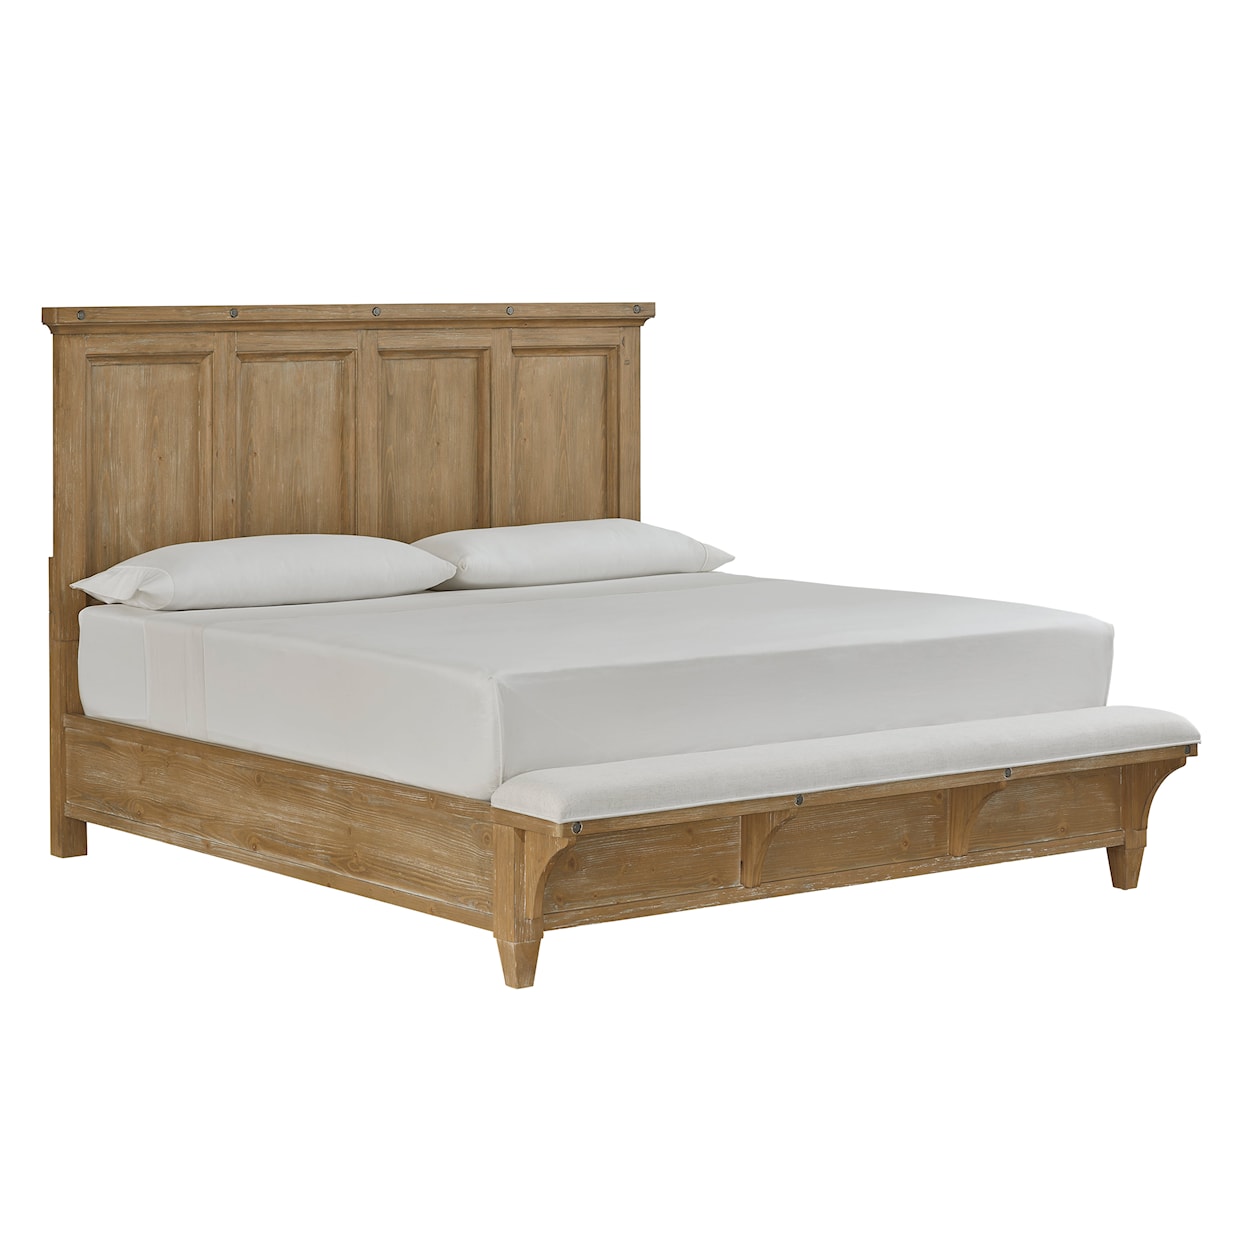 Magnussen Home Lynnfield Bedroom King Panel Bed with Bench